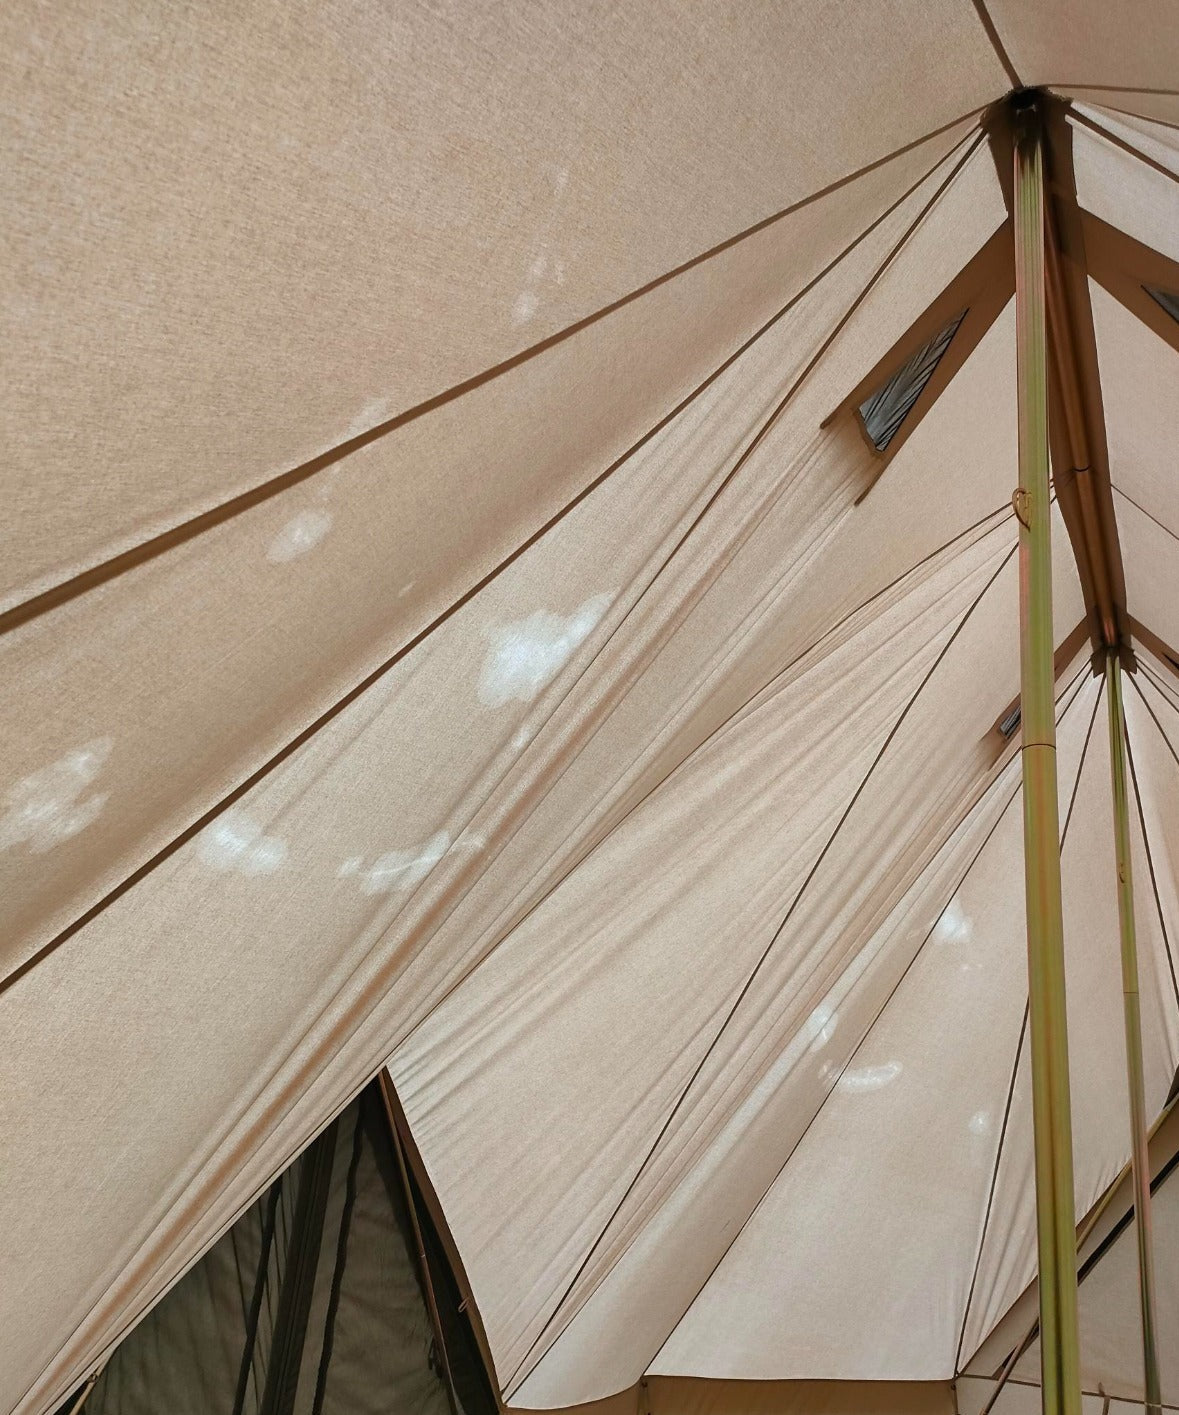 As New BTV 1 Emperor - Cotton Canvas Bell Tent - Grade A (No Issues Just Slight Discolouration)